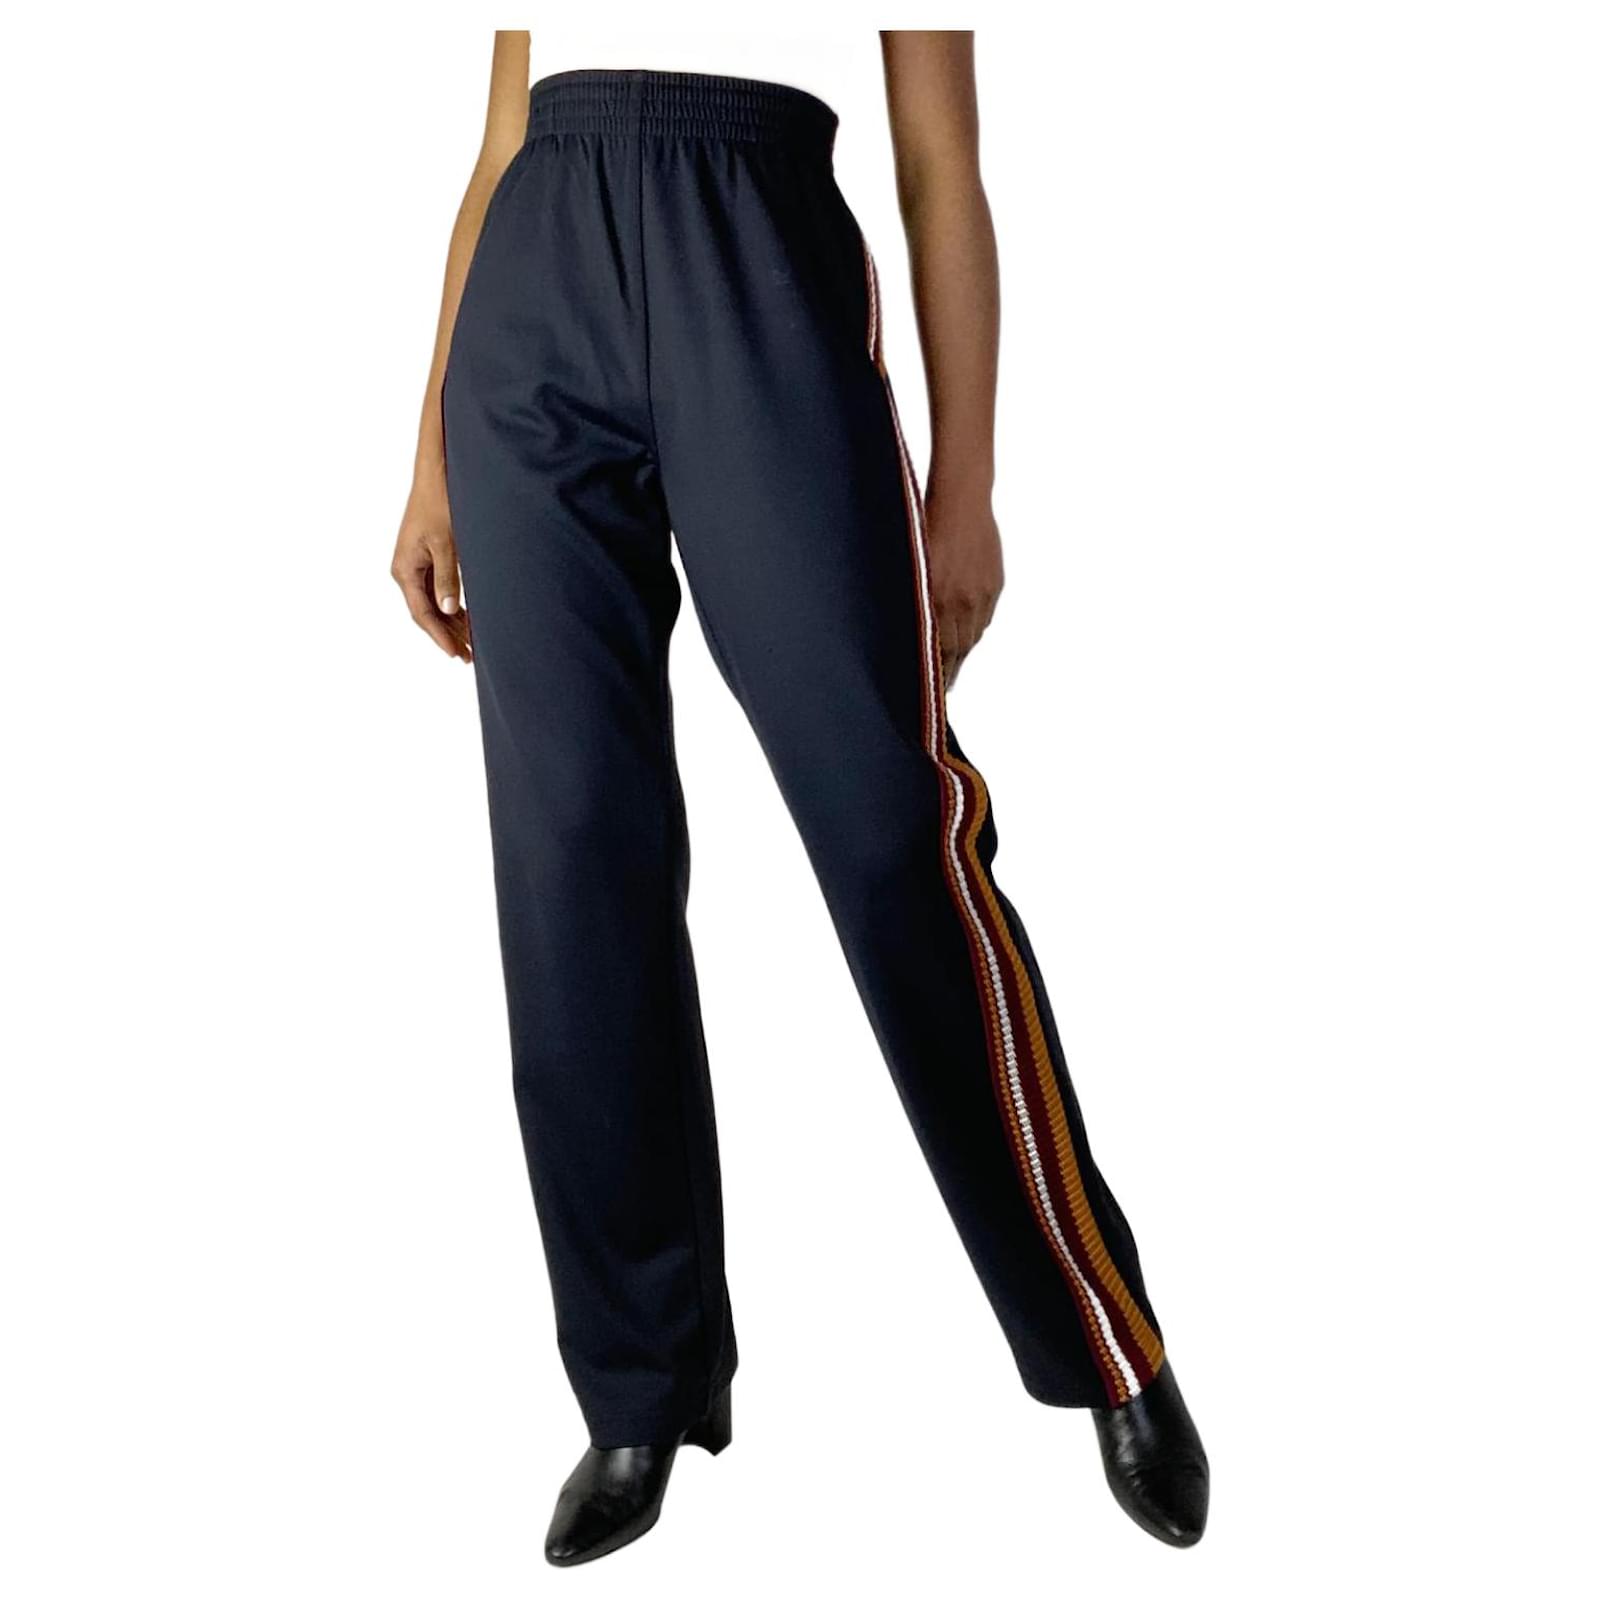 Buy MEN'S TRACK-PANT XL SIZE - Men's Clothing - Casual Trousers - eLookCart